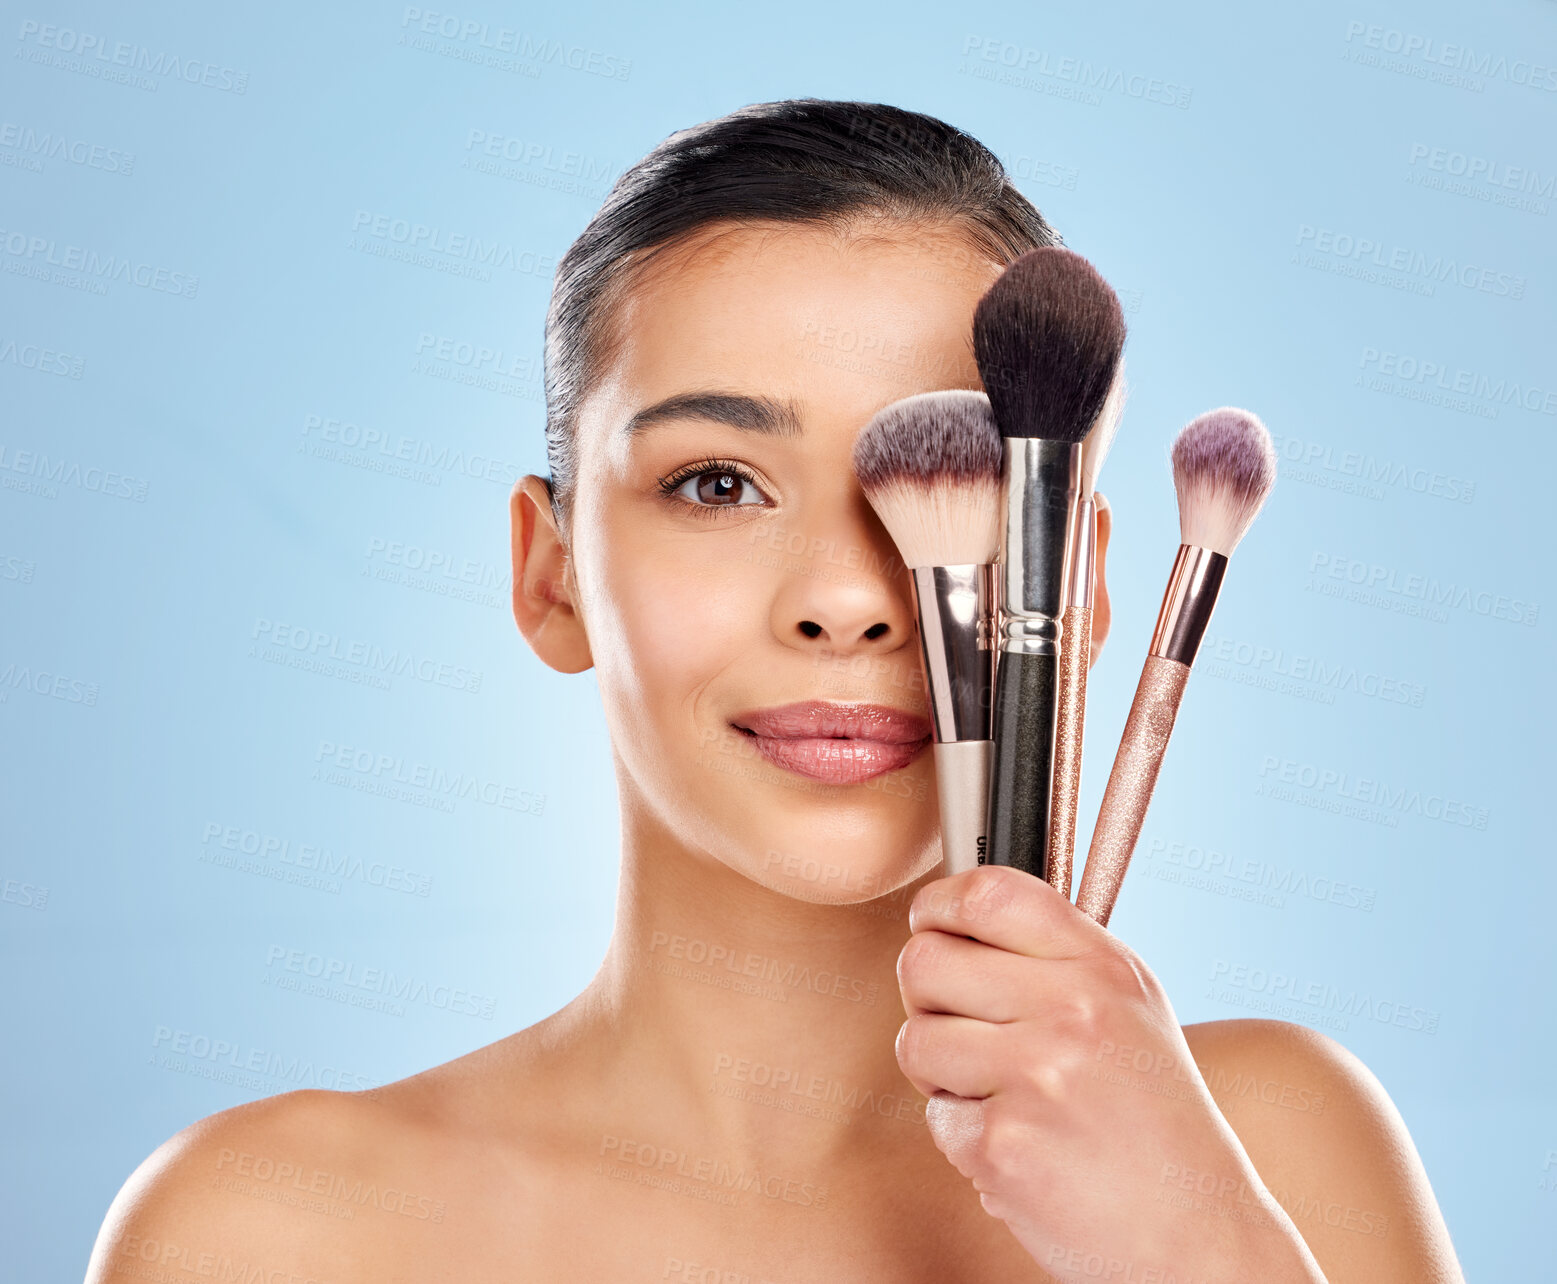 Buy stock photo Studio portrait of an attractive young woman holding a collection of makeup brushes against a blue background